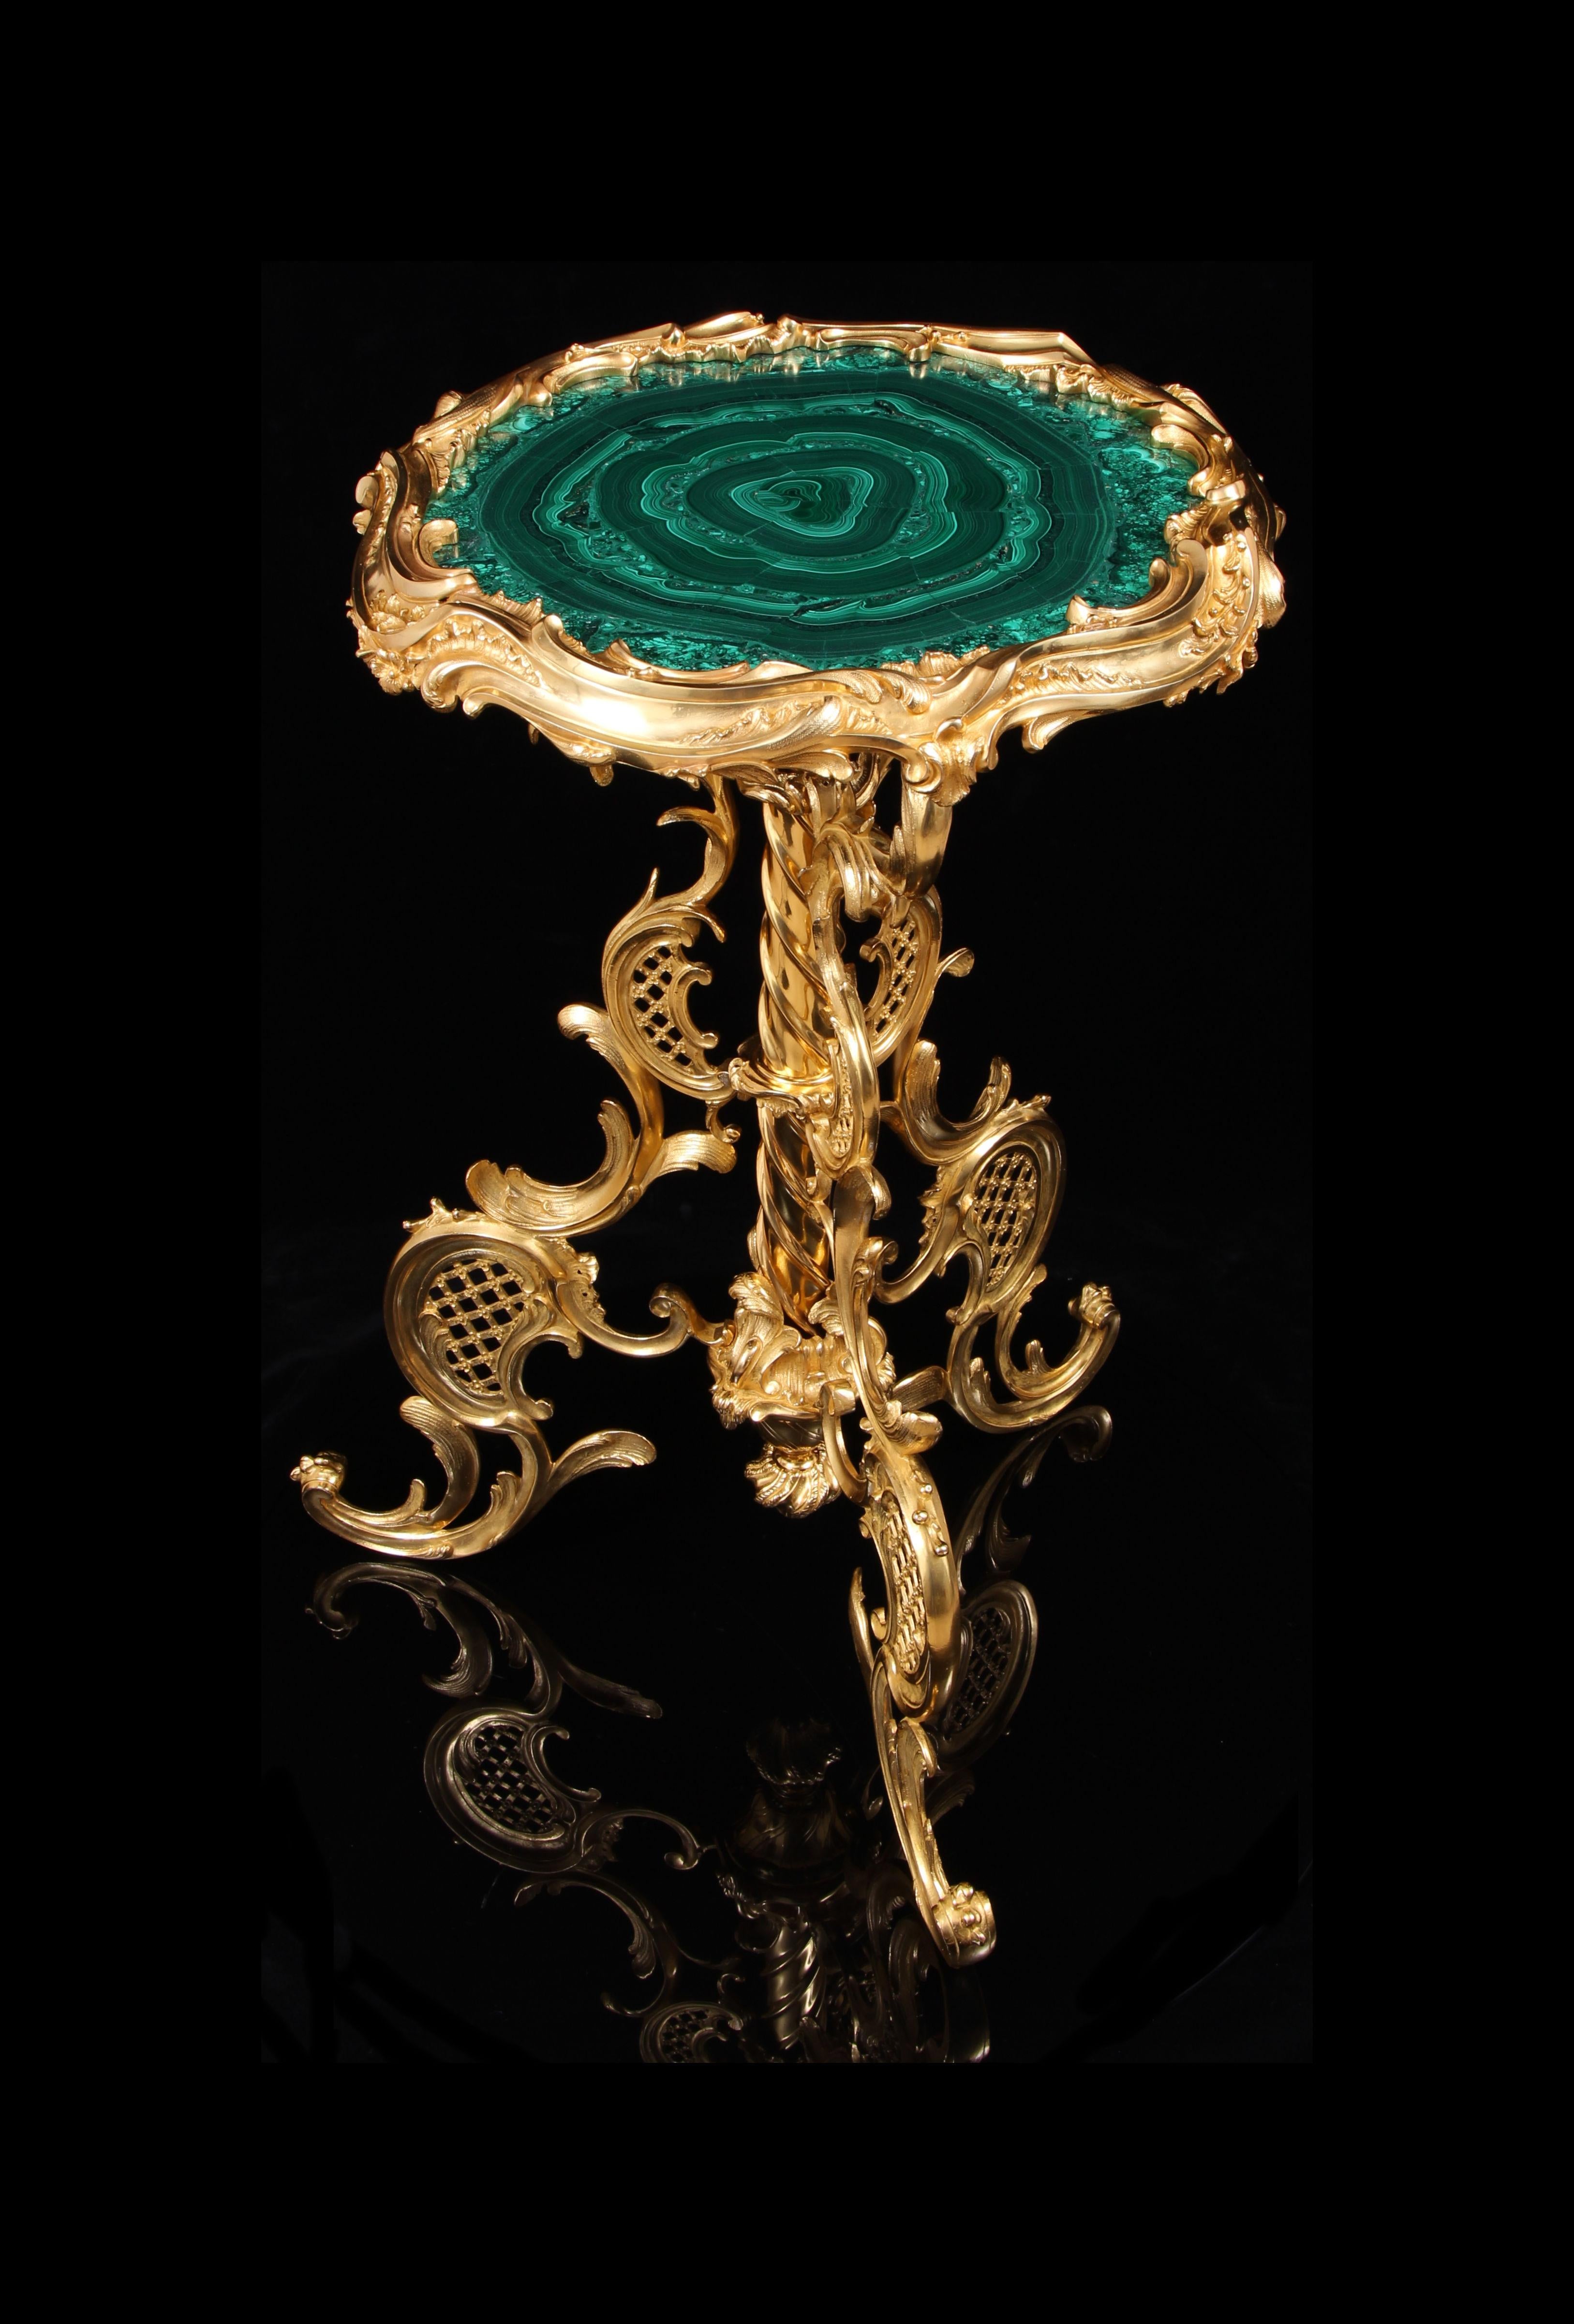 Important 19th Century Rococo Gilt Bronze & Malachite Guéridon. This magnificent table is designed and made in the most superb sculptural of rococo form, this finely cast polished & gilded solid Bronze masterpiece, incorporates a truly fabulous